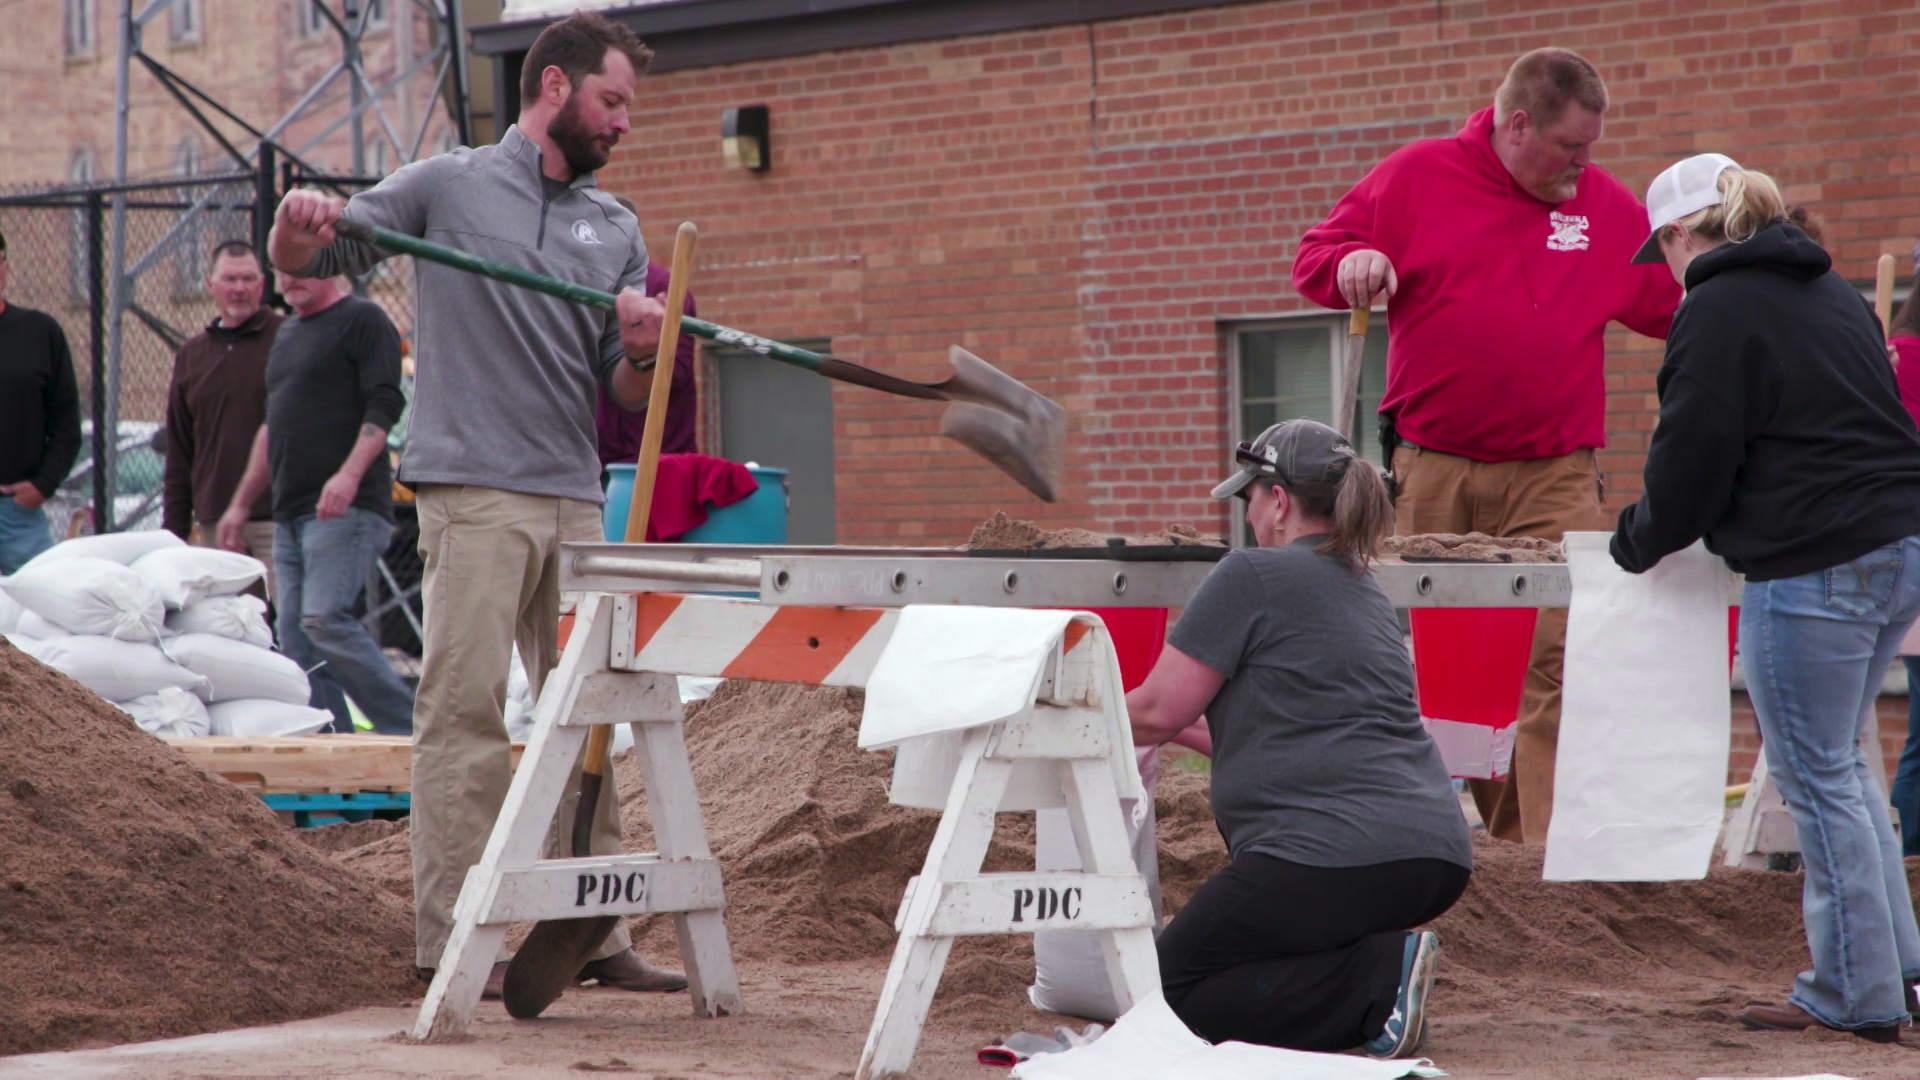 Multiple people stand and crouch among piles of sand as they use shovels to fill sandbags next to a brick building.